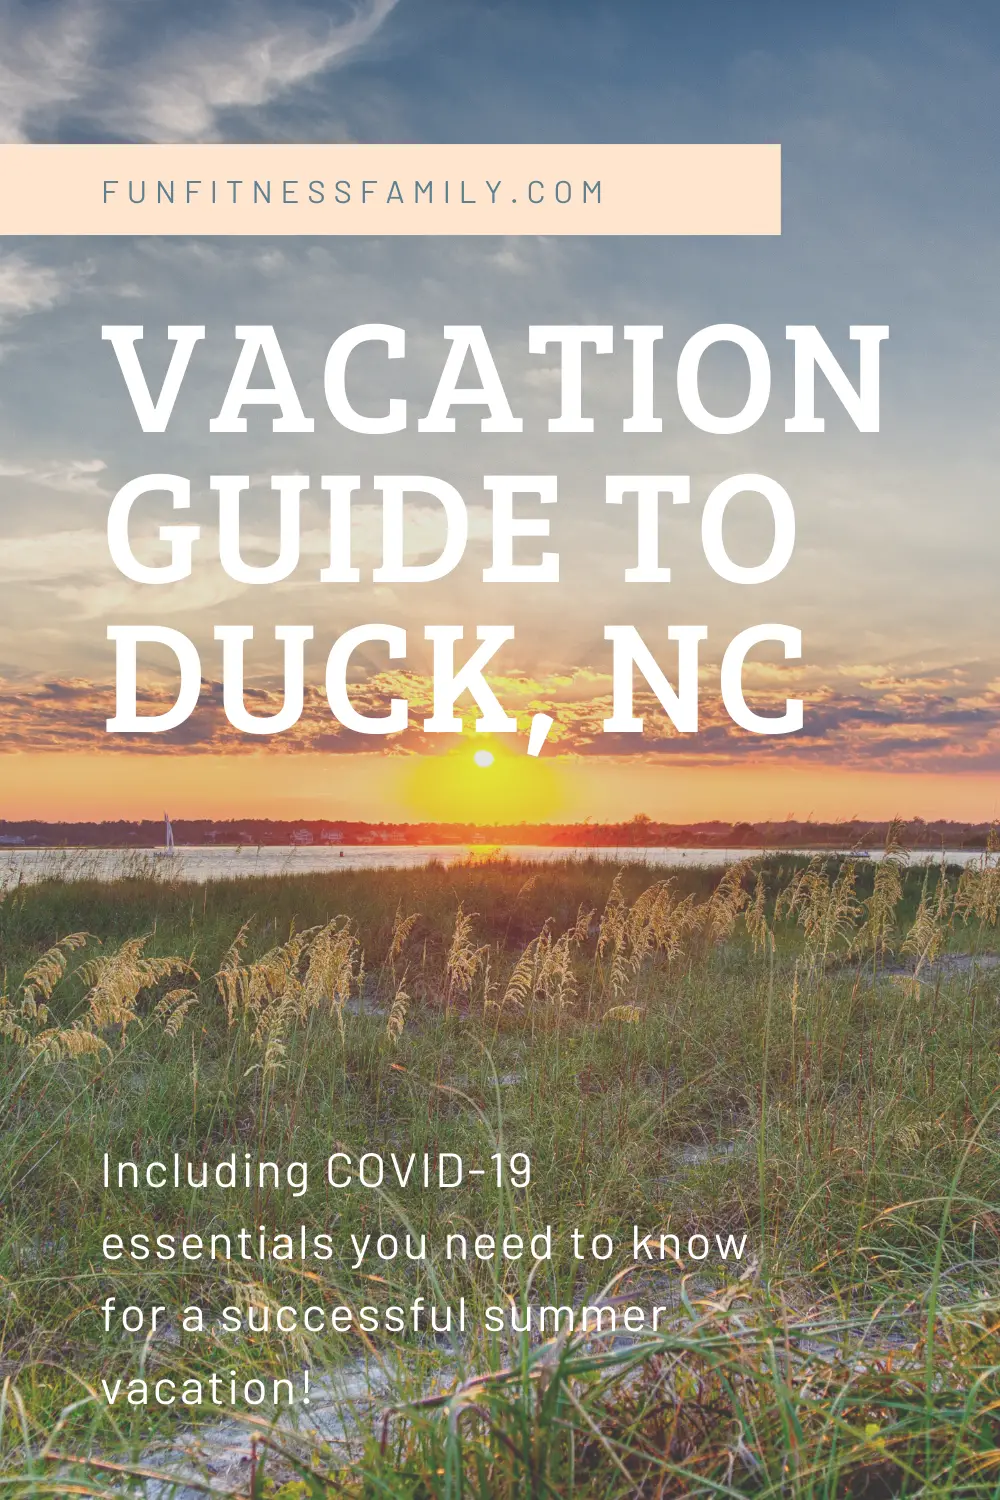 Beginners Guide to Duck, Outer Banks North Carolina  including COVID-19 information to make your beach week safe and fun! .#NorthCarolina #OBX #FamilyVacation #BeachVacation #DuckNC #COVID19Vacation